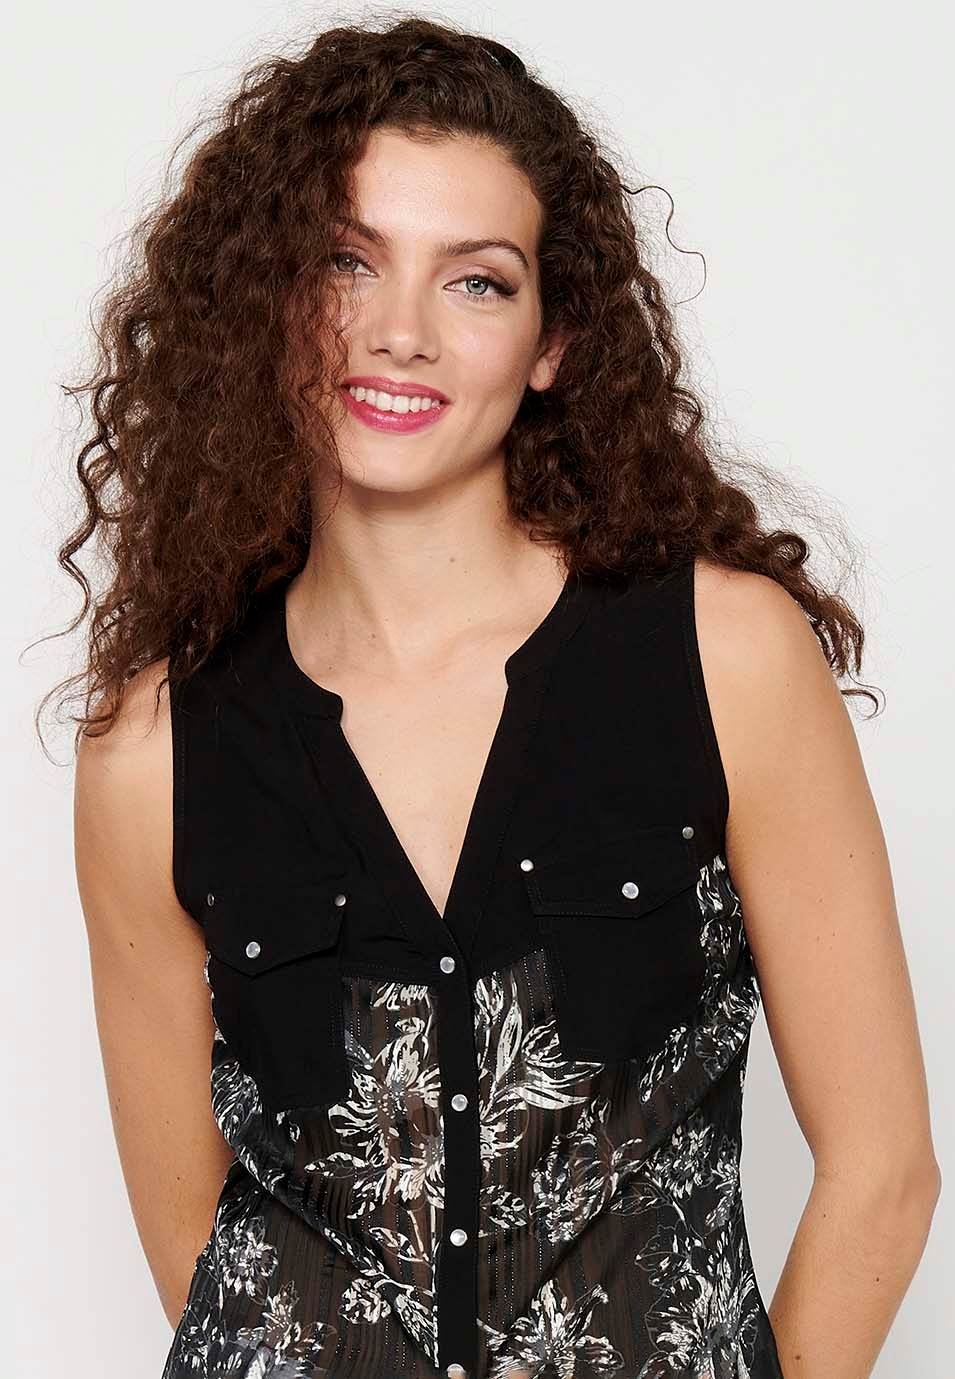 Sleeveless Blouse with Shirt Neckline and Black Floral Print for Women